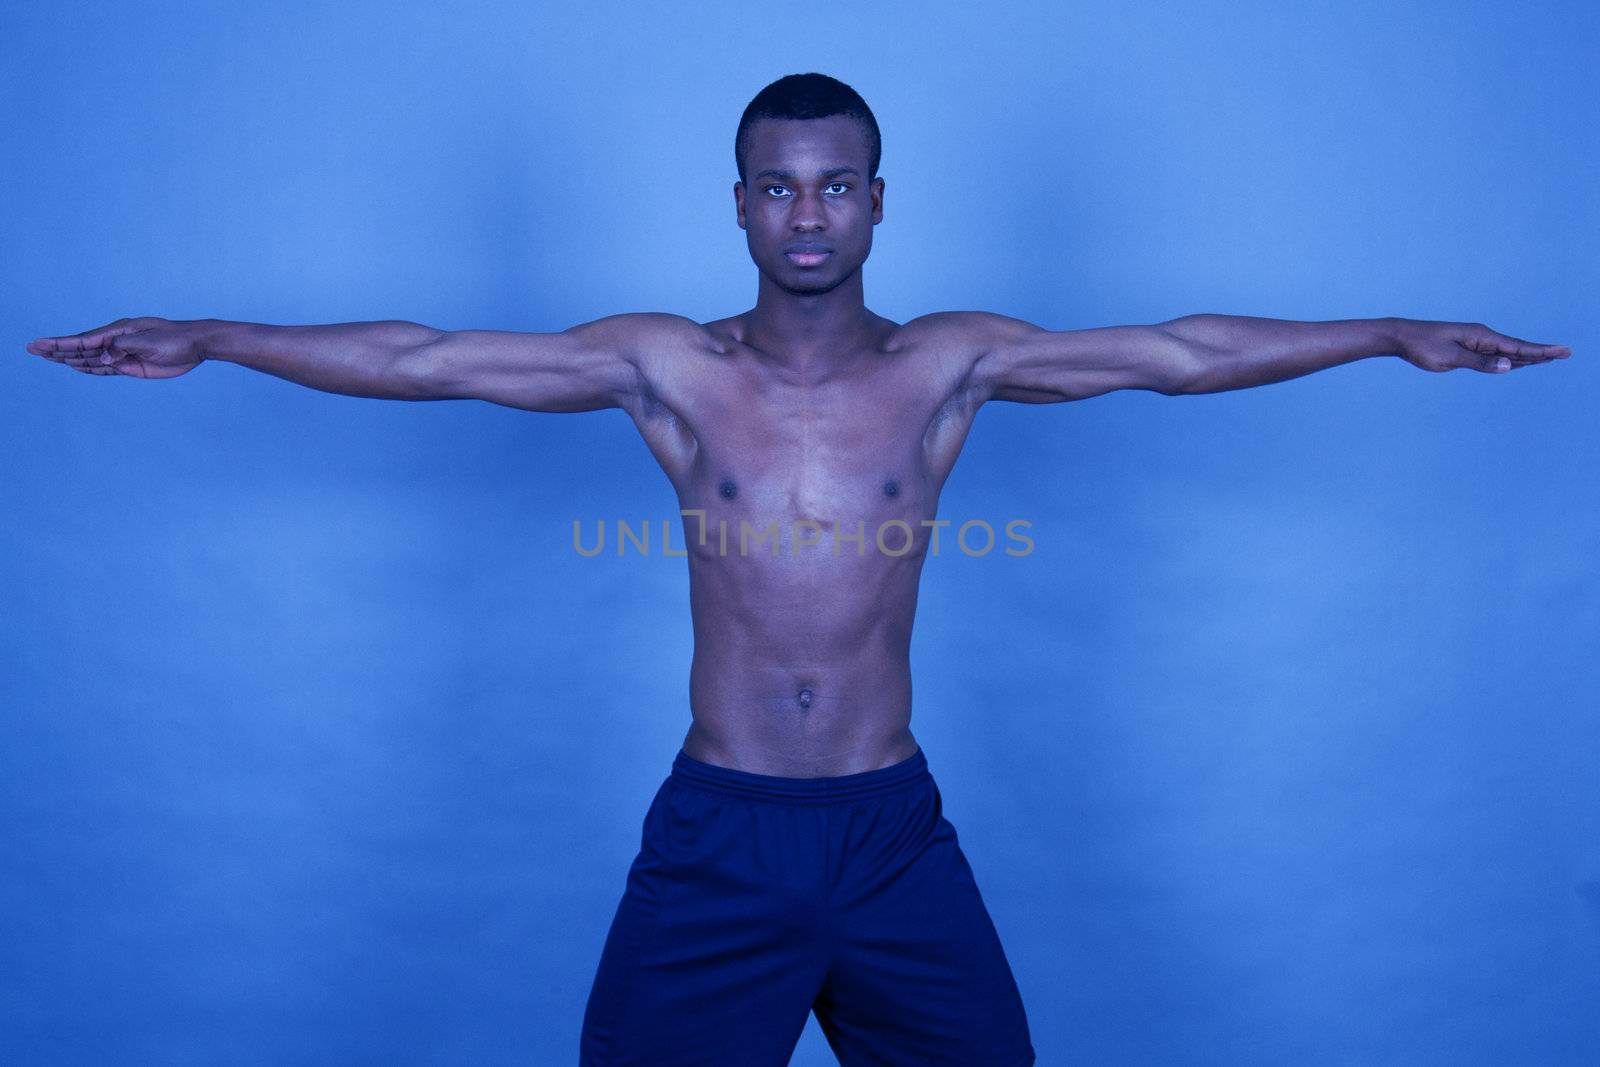 young man with black skin ist doing fittness by juniart